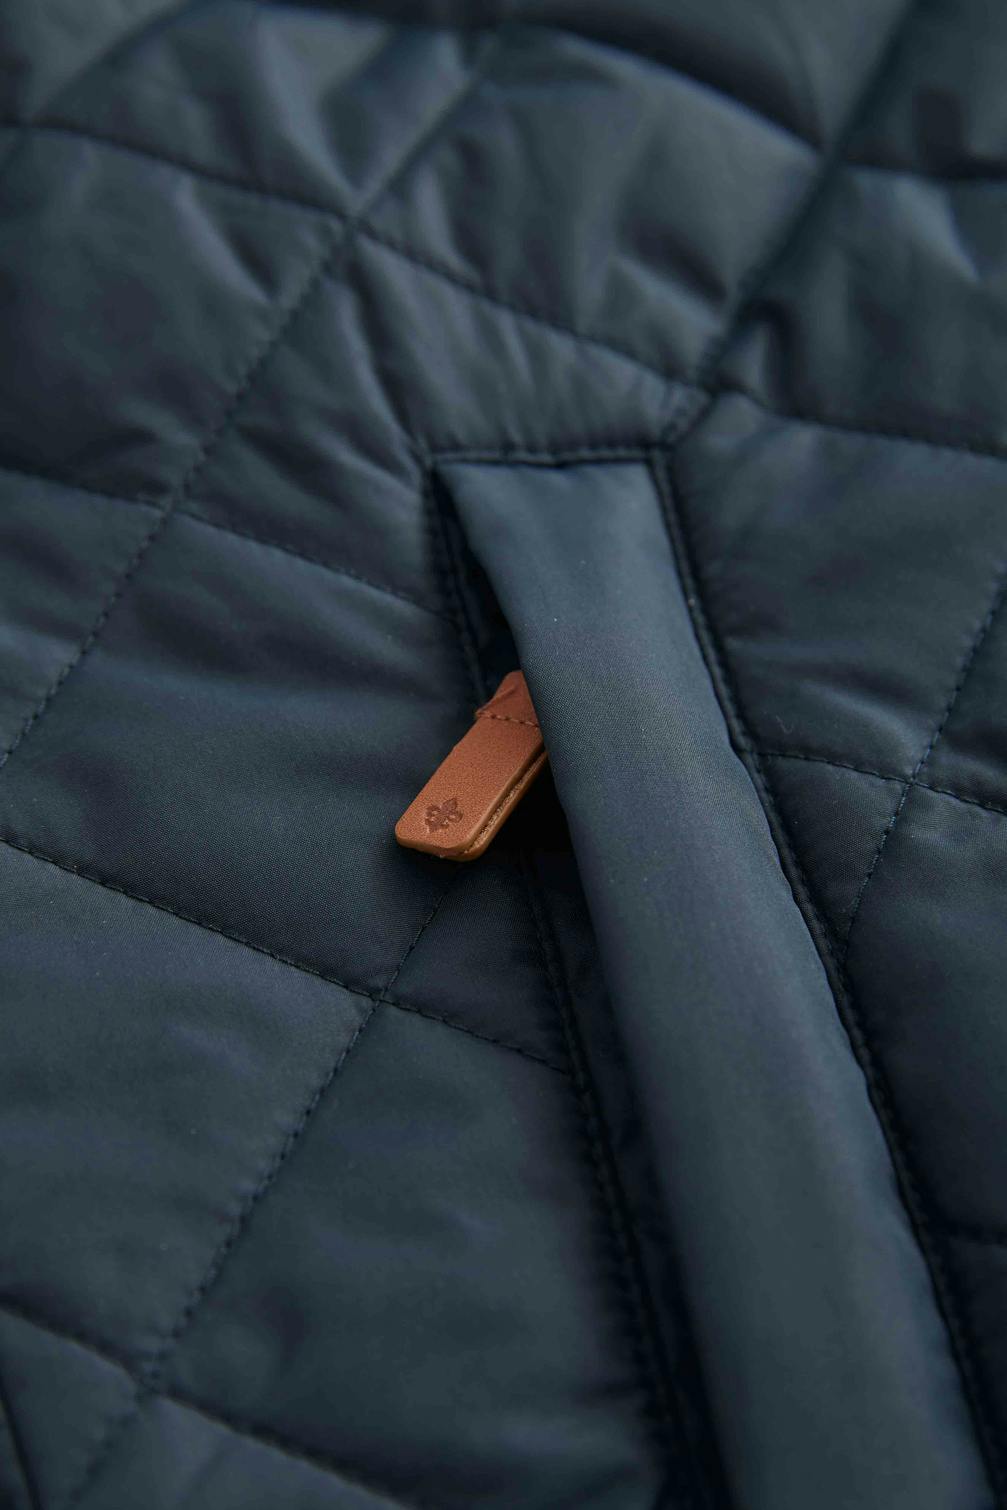 Trenton Quilted Jacket